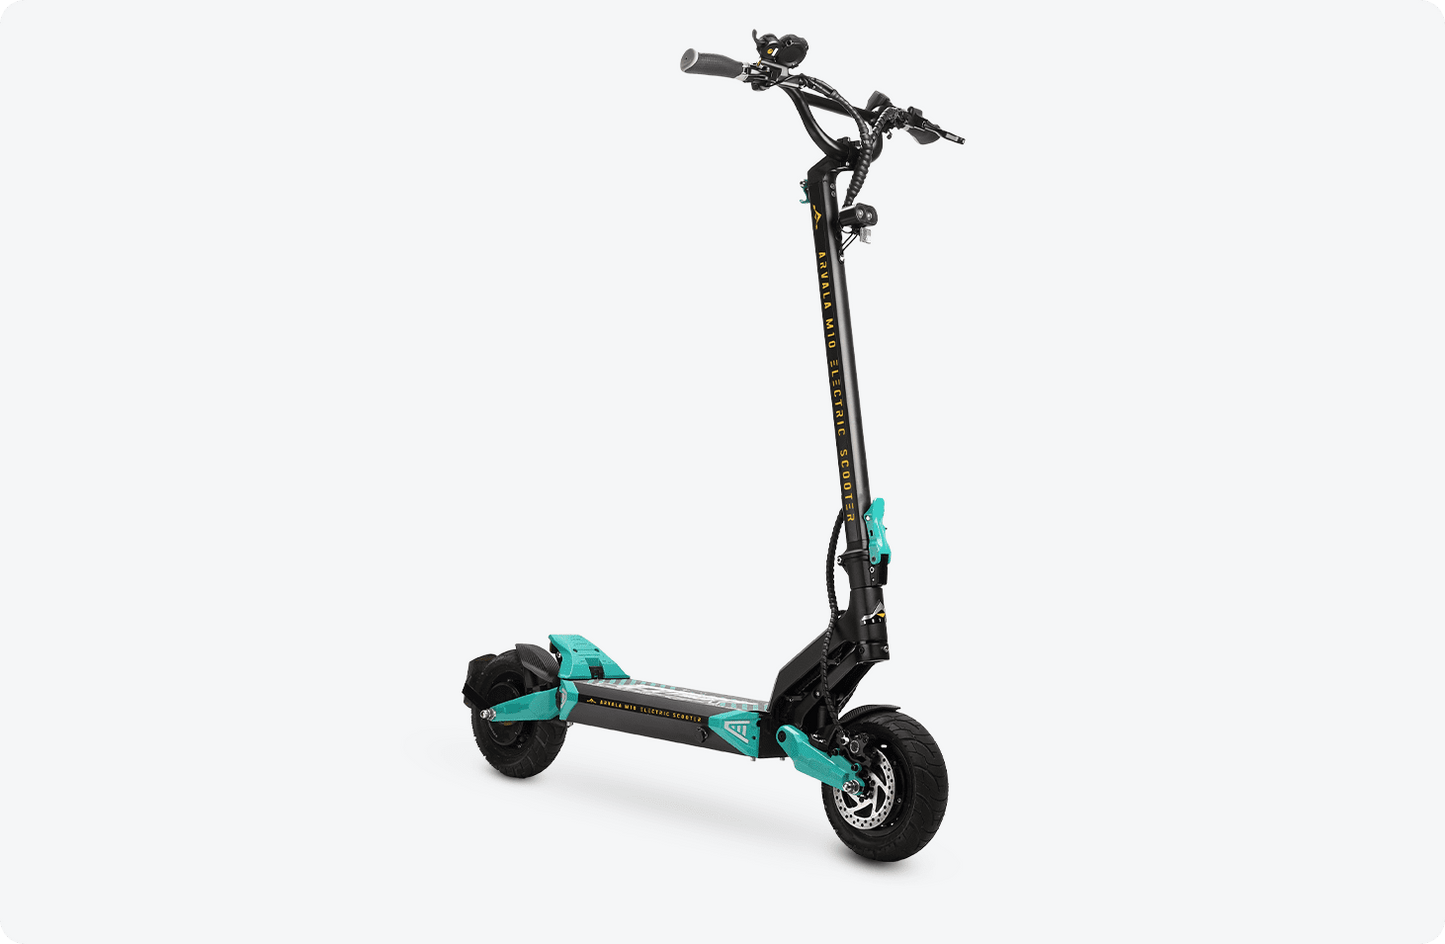 ARVALA M10 – ARVALA Electric scooter